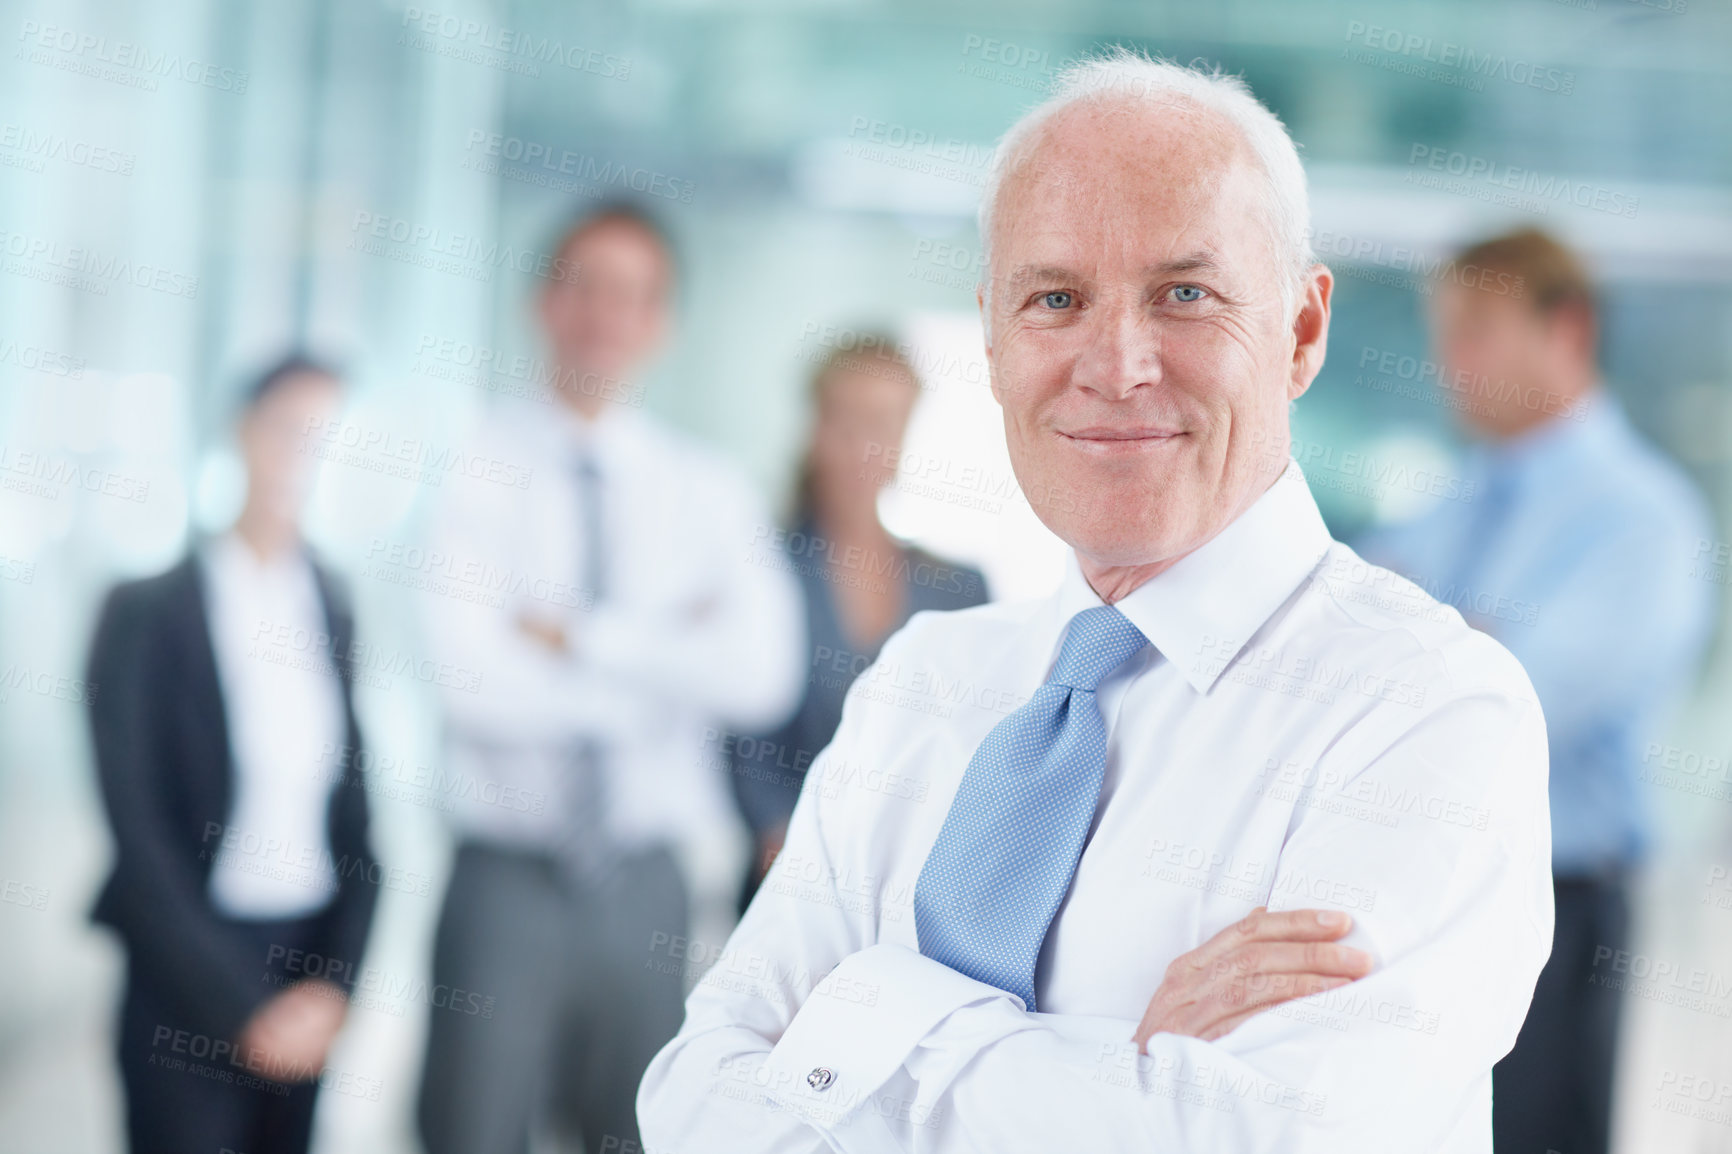 Buy stock photo Smiling senior businessman standing with his team in the background - portrait 